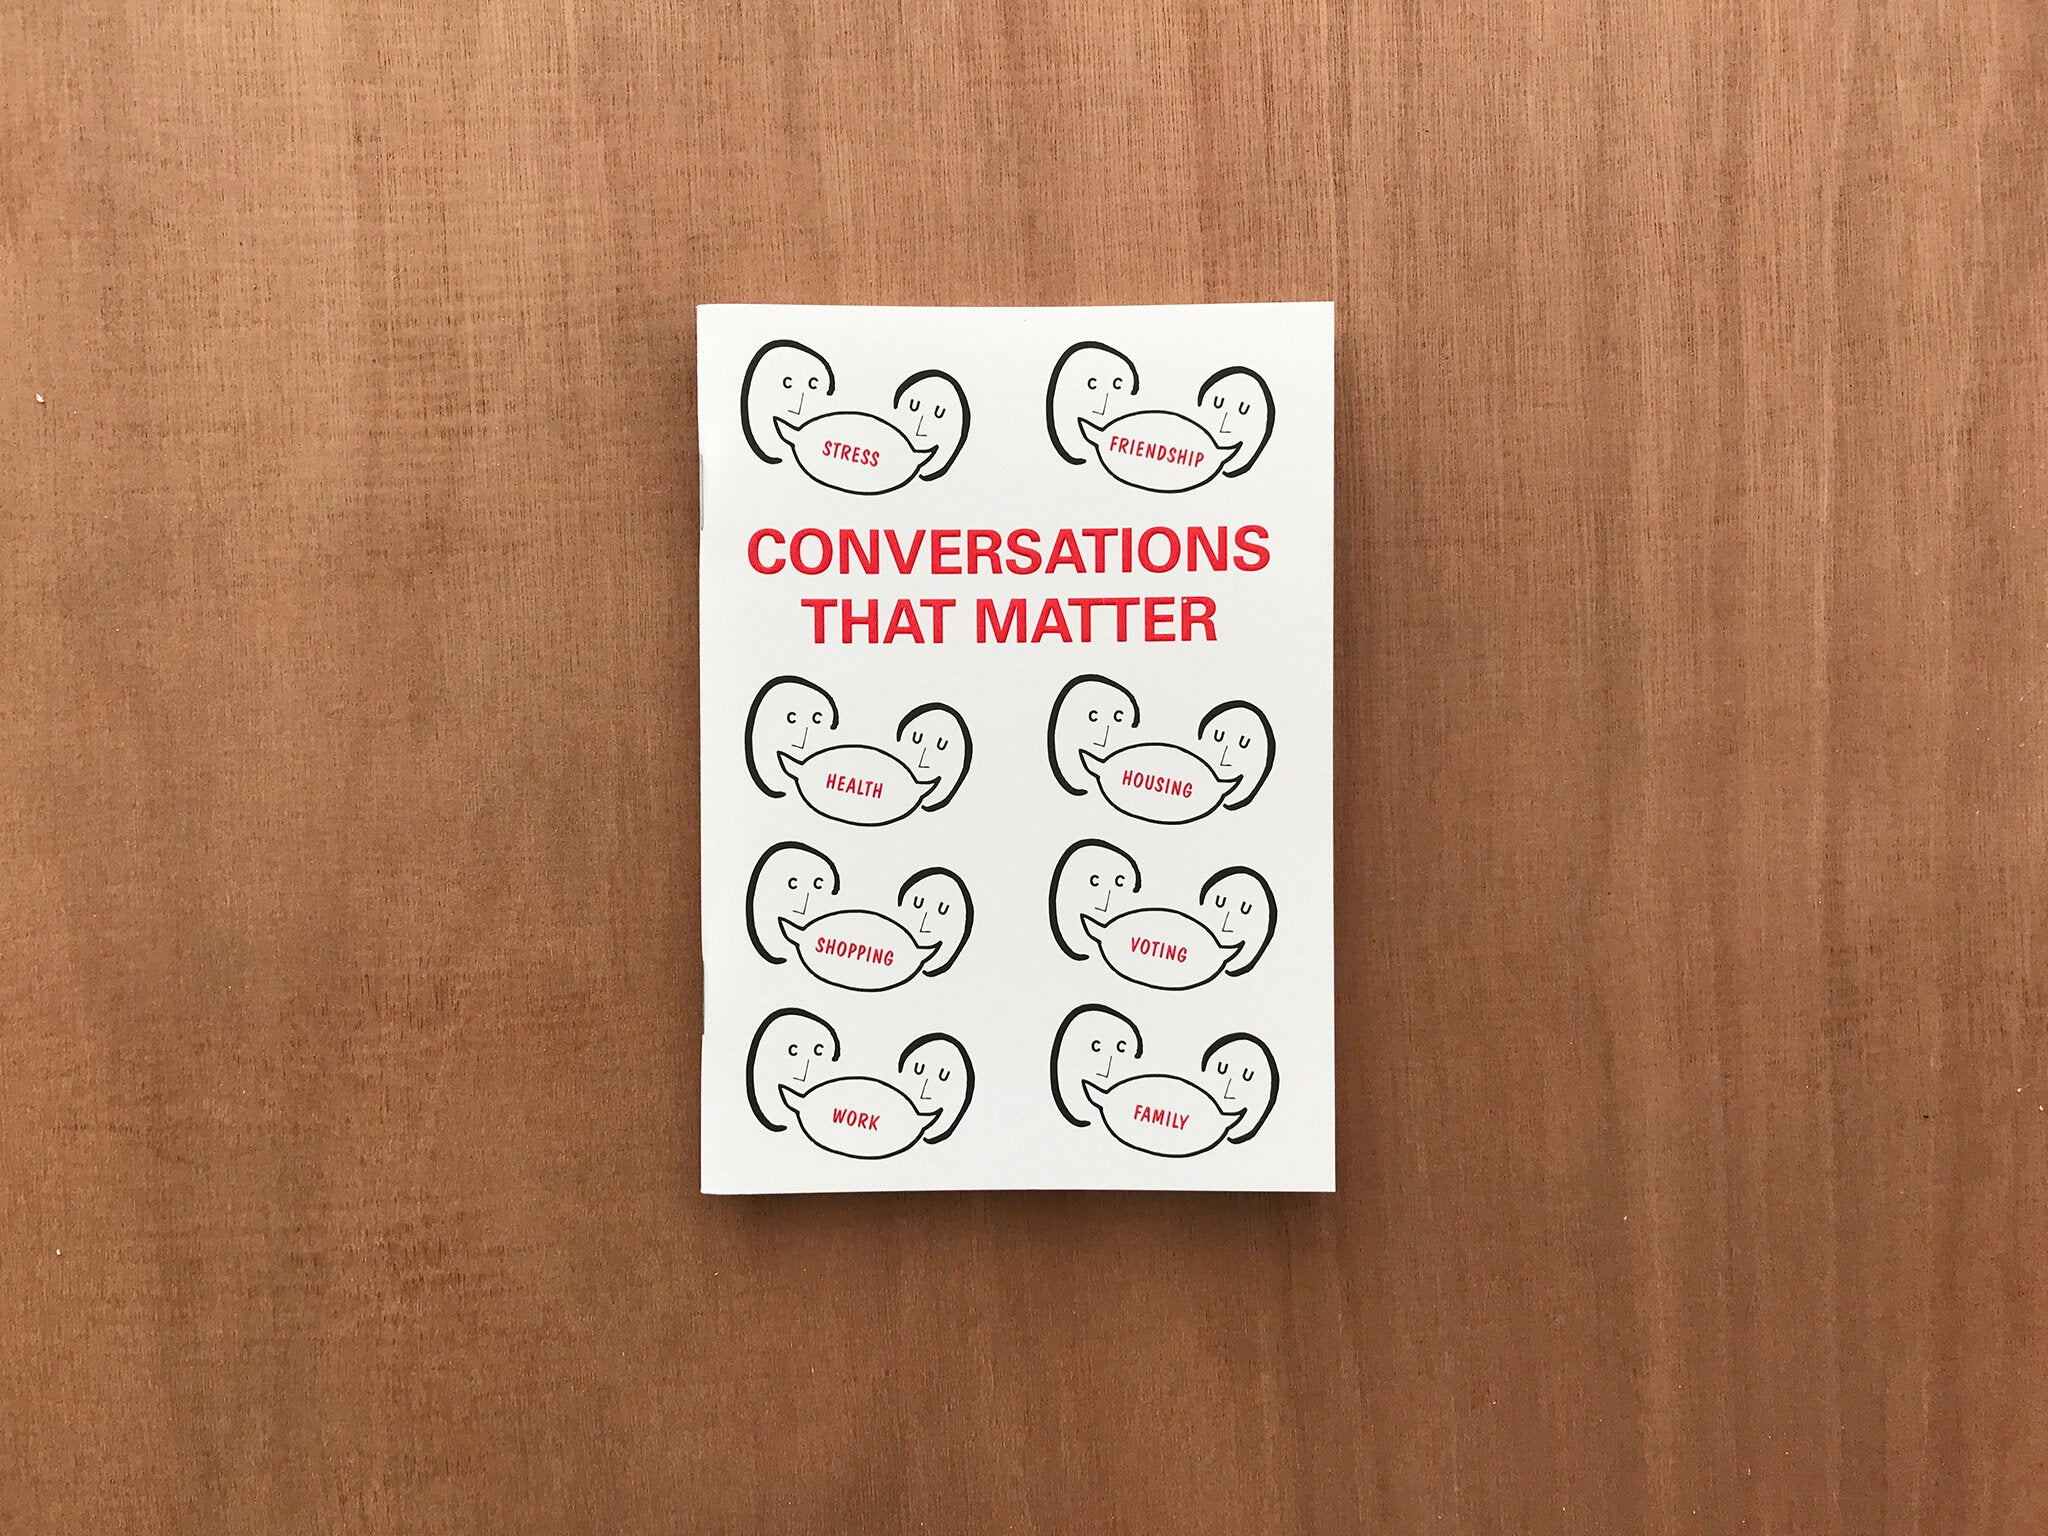 CONVERSATIONS THAT MATTER by Ruth Beale and Amy Feneck